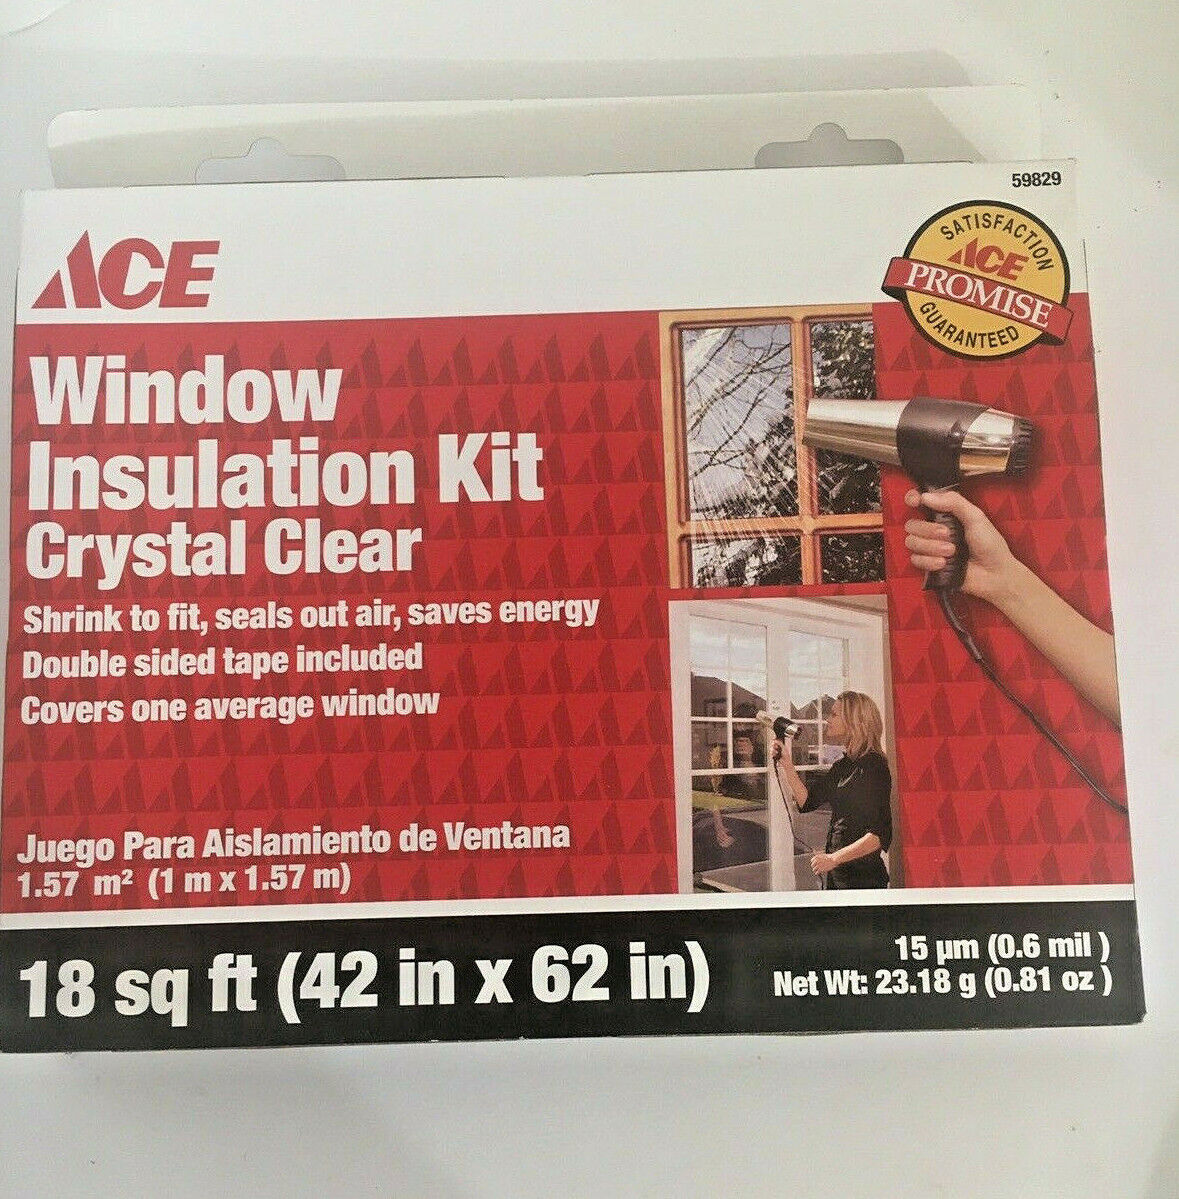 Lot Of 2 Ace Window Insulation Kit Crystal Clear 18 Sq. Ft. 42" x 62" NEW ACE